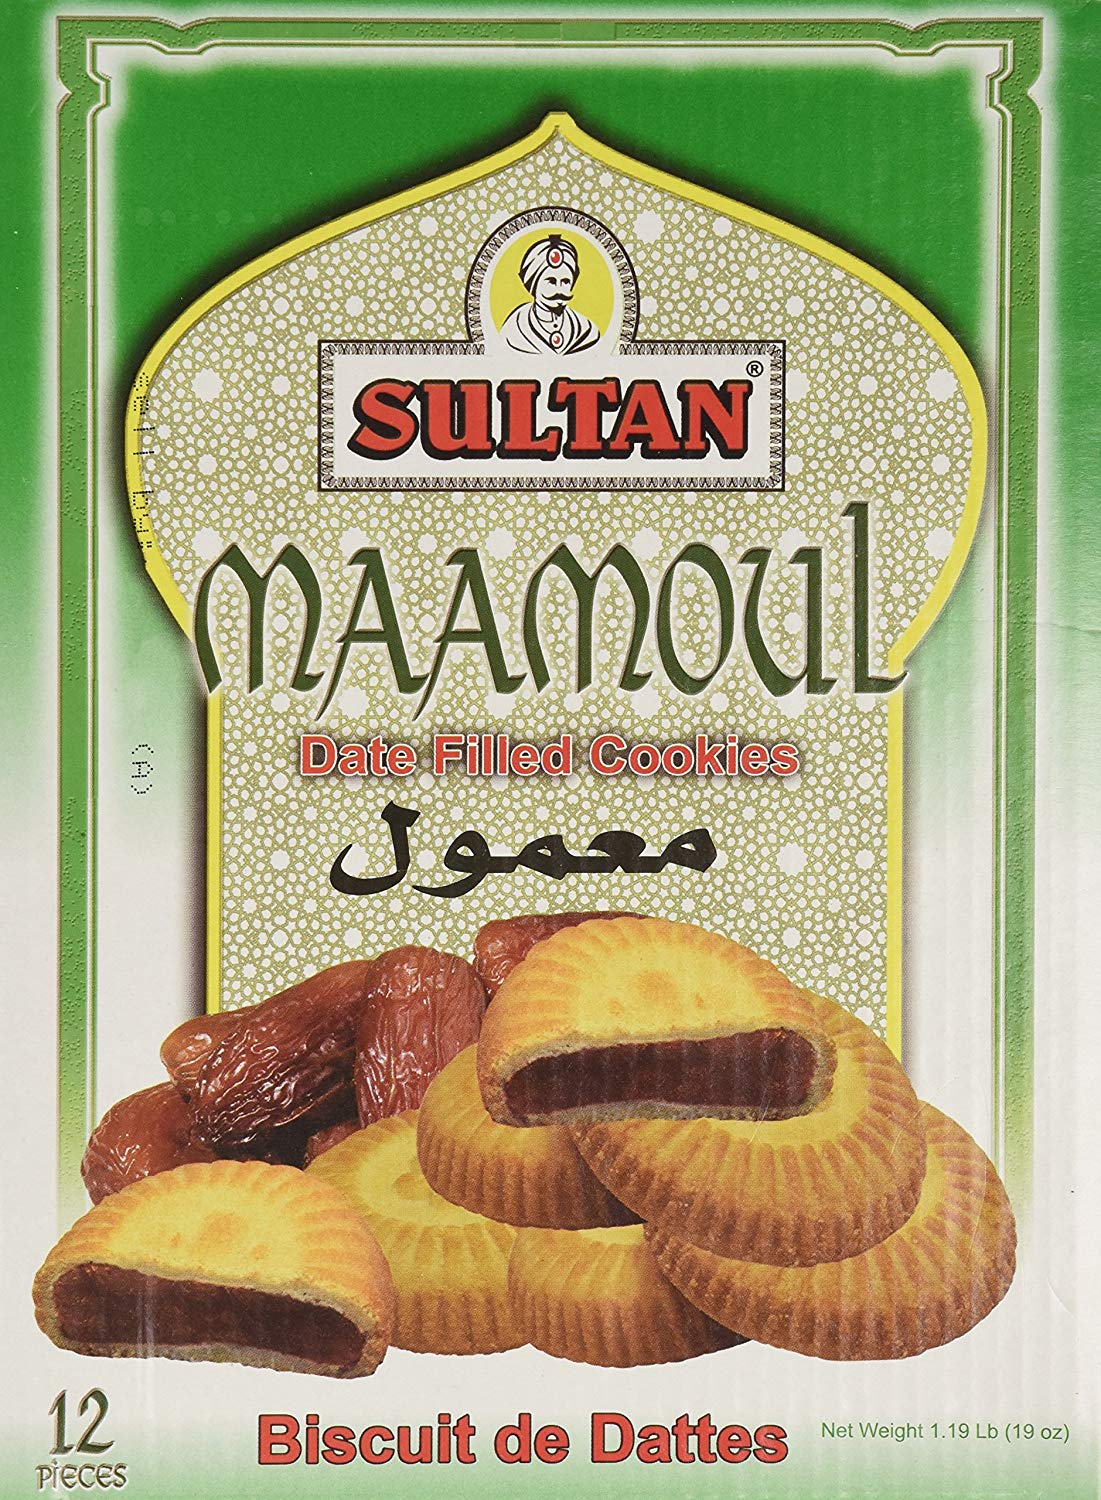 SULTAN MAAMOUL DATE FILLED COOKIES (1.19 LB)